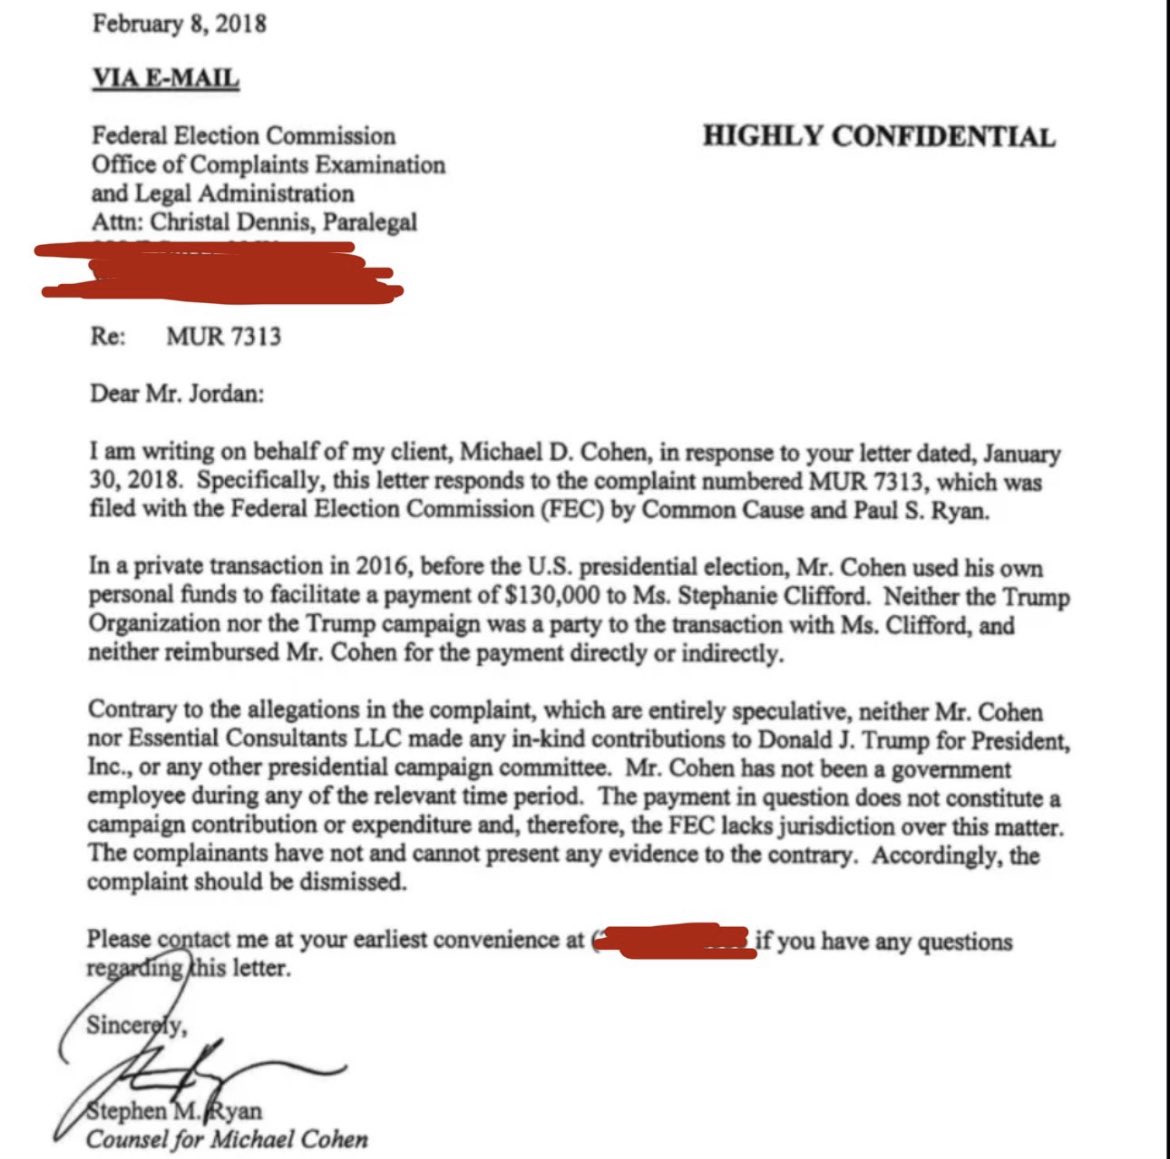 DUE TO THE DIRTY JUDGE MERCHAN’S GAG ORDER…TRUMP CAN’T SHARE THIS BUT YOU CAN! 

This sham case has no crime and this letter 👇from Cohen’s own attorney admits that Trump et al. did not pay $130k to Stormy….Cohen did! IMHO, he’s lying to frame Trump! 

(Letter posted by…